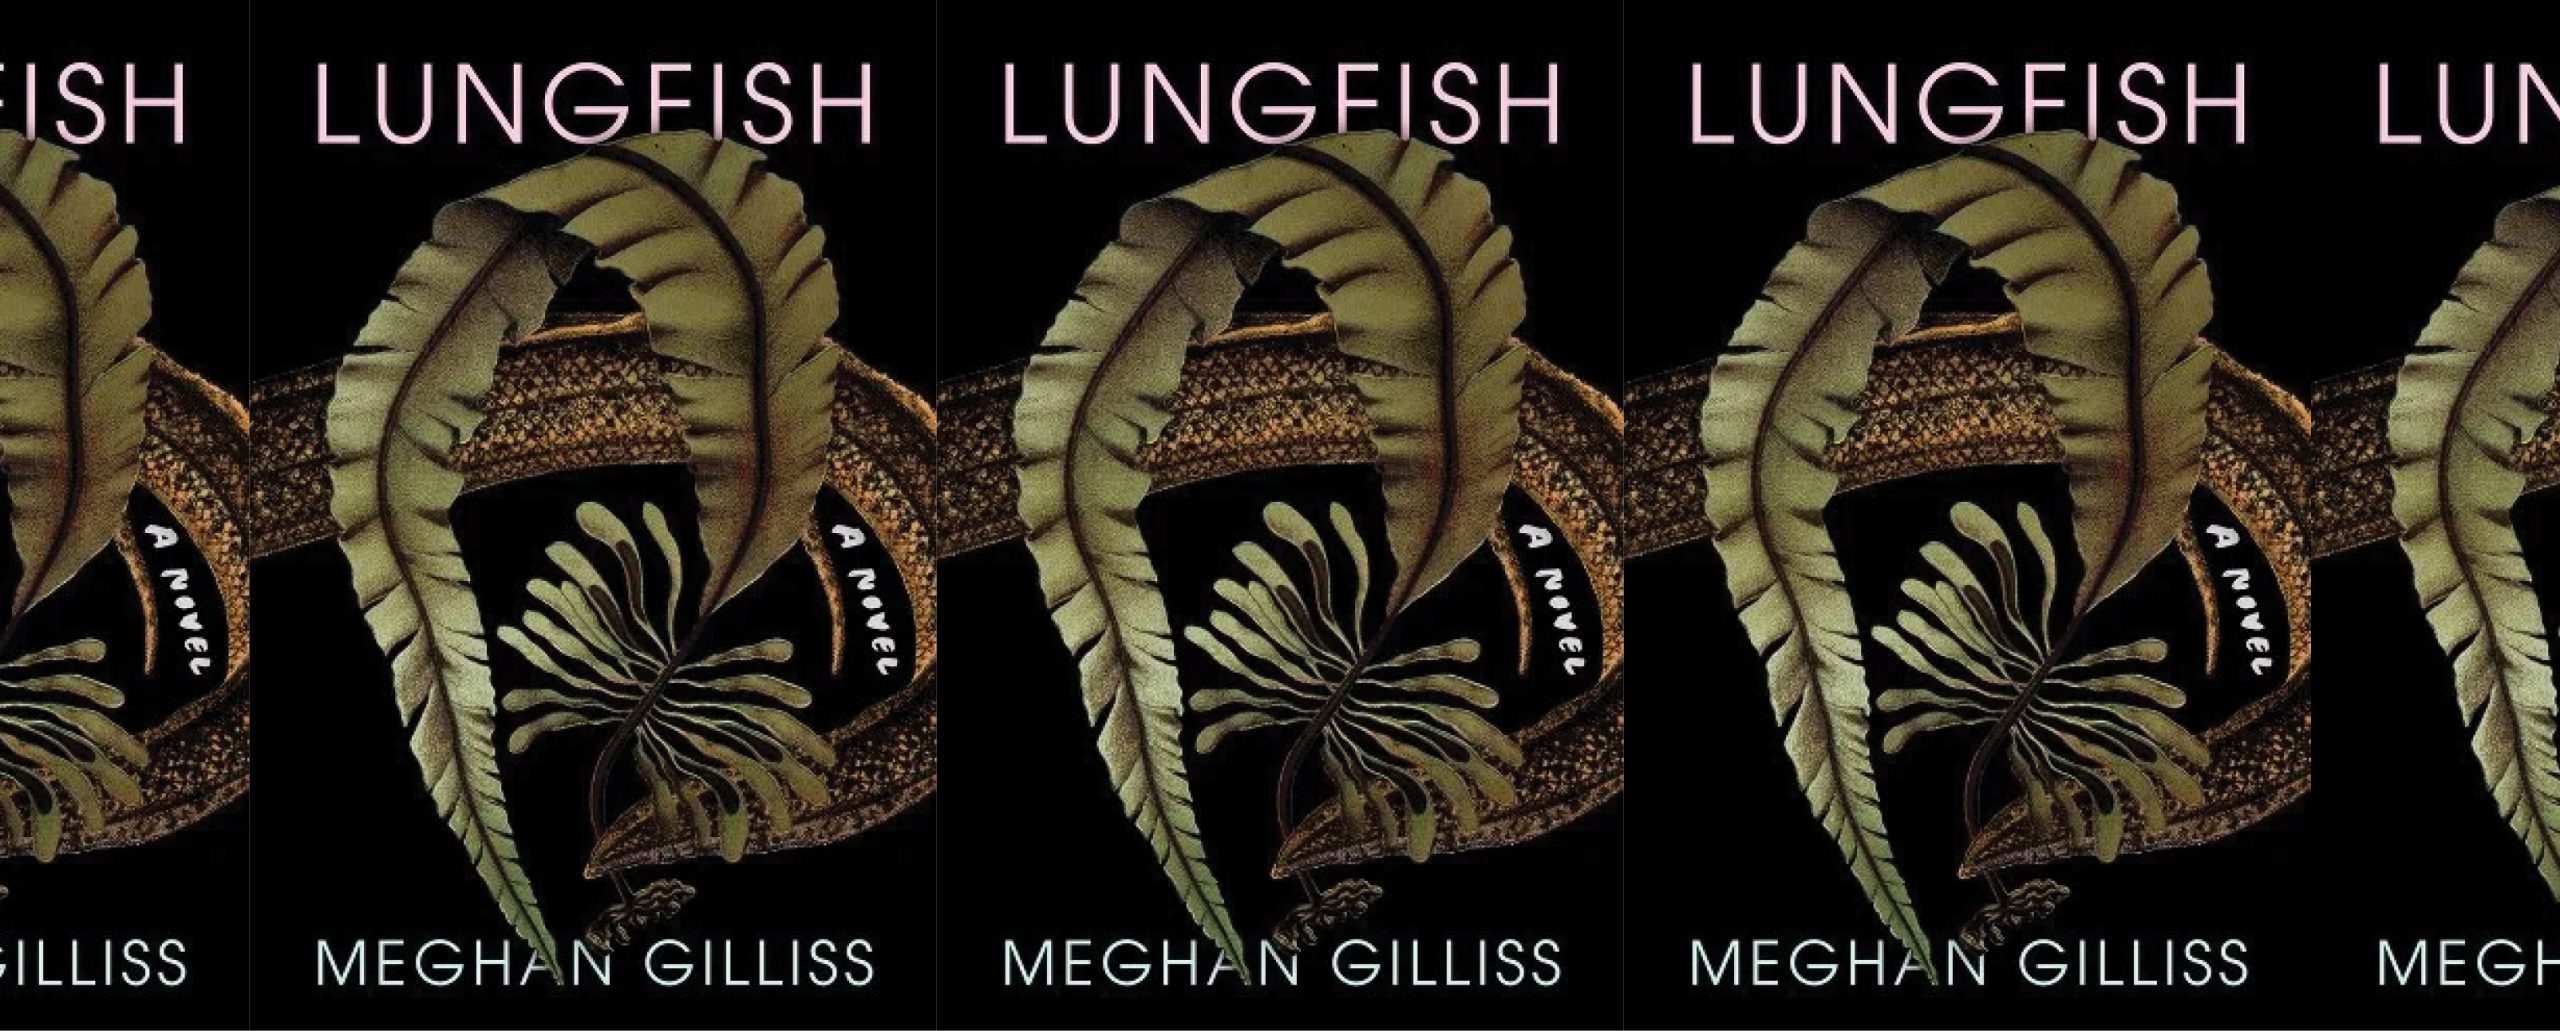 the book cover of Lungfish